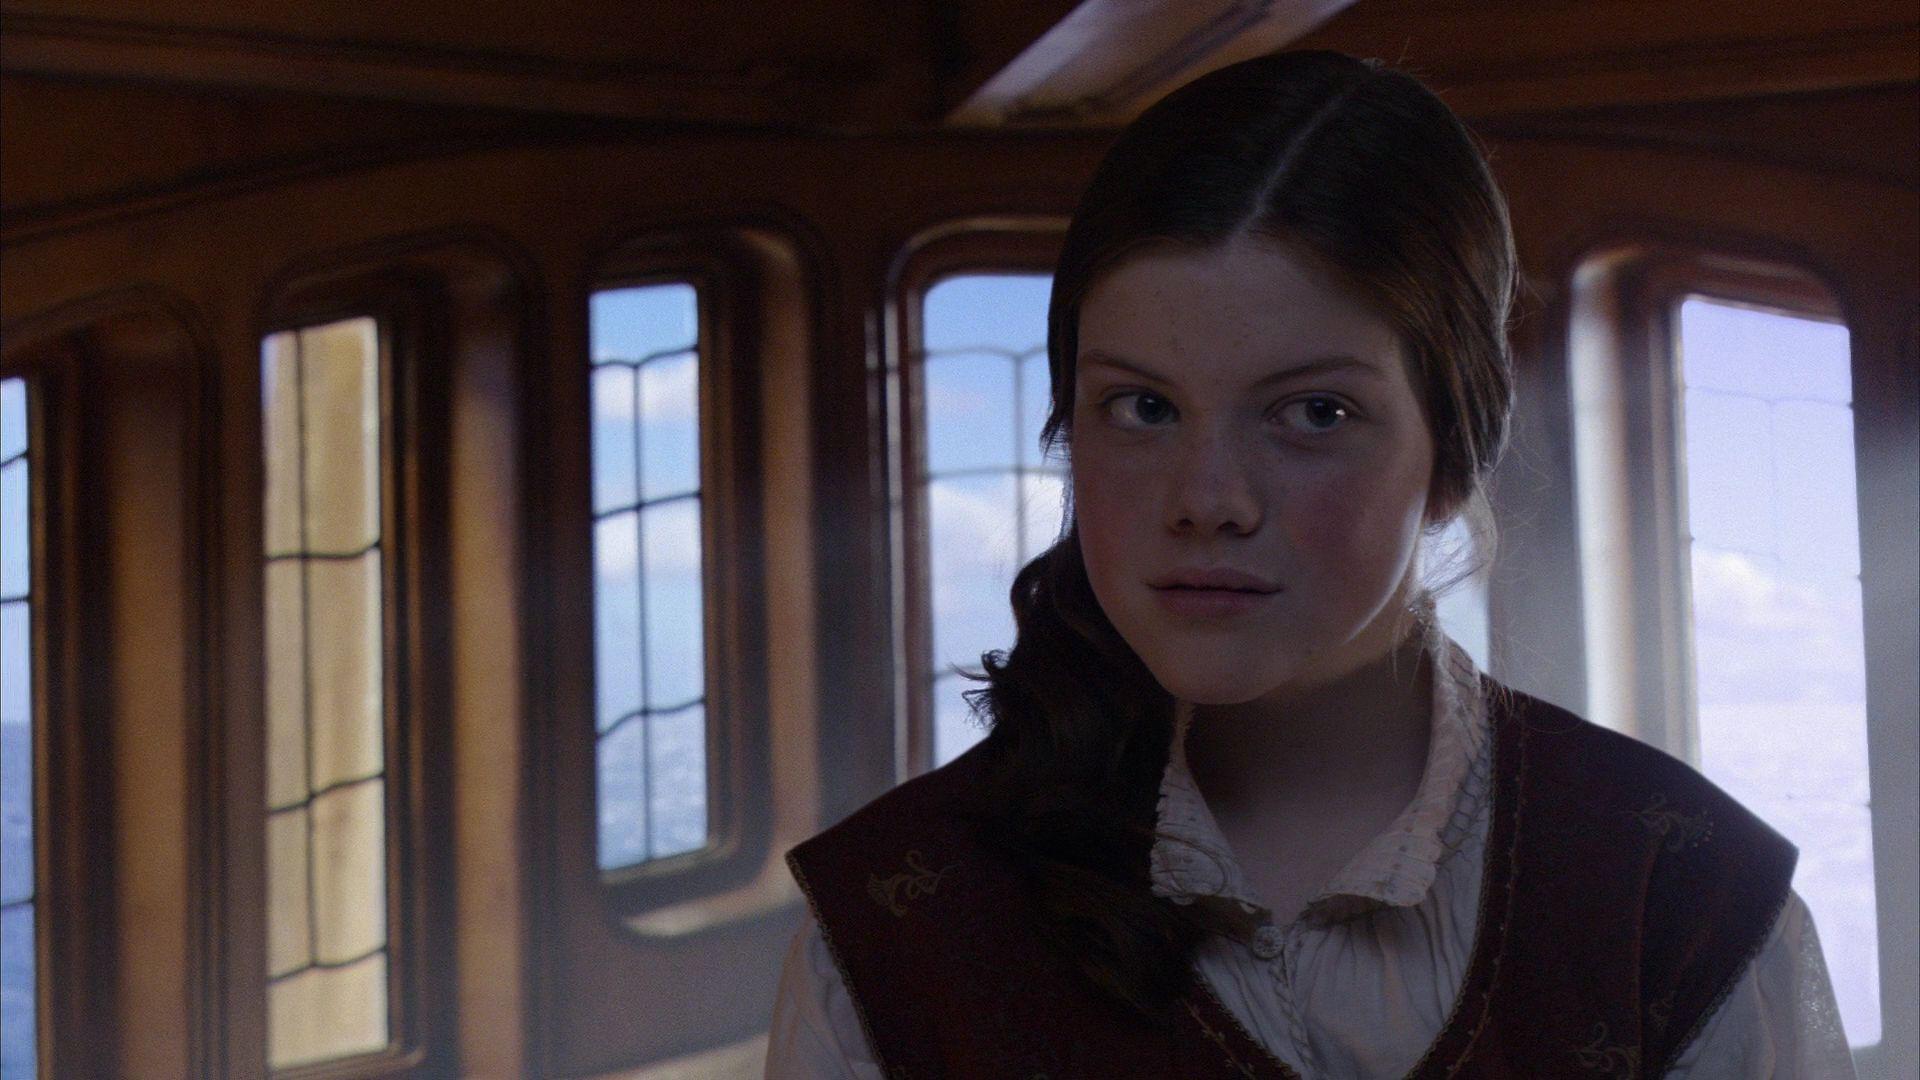 lucy voyage of the dawn treader